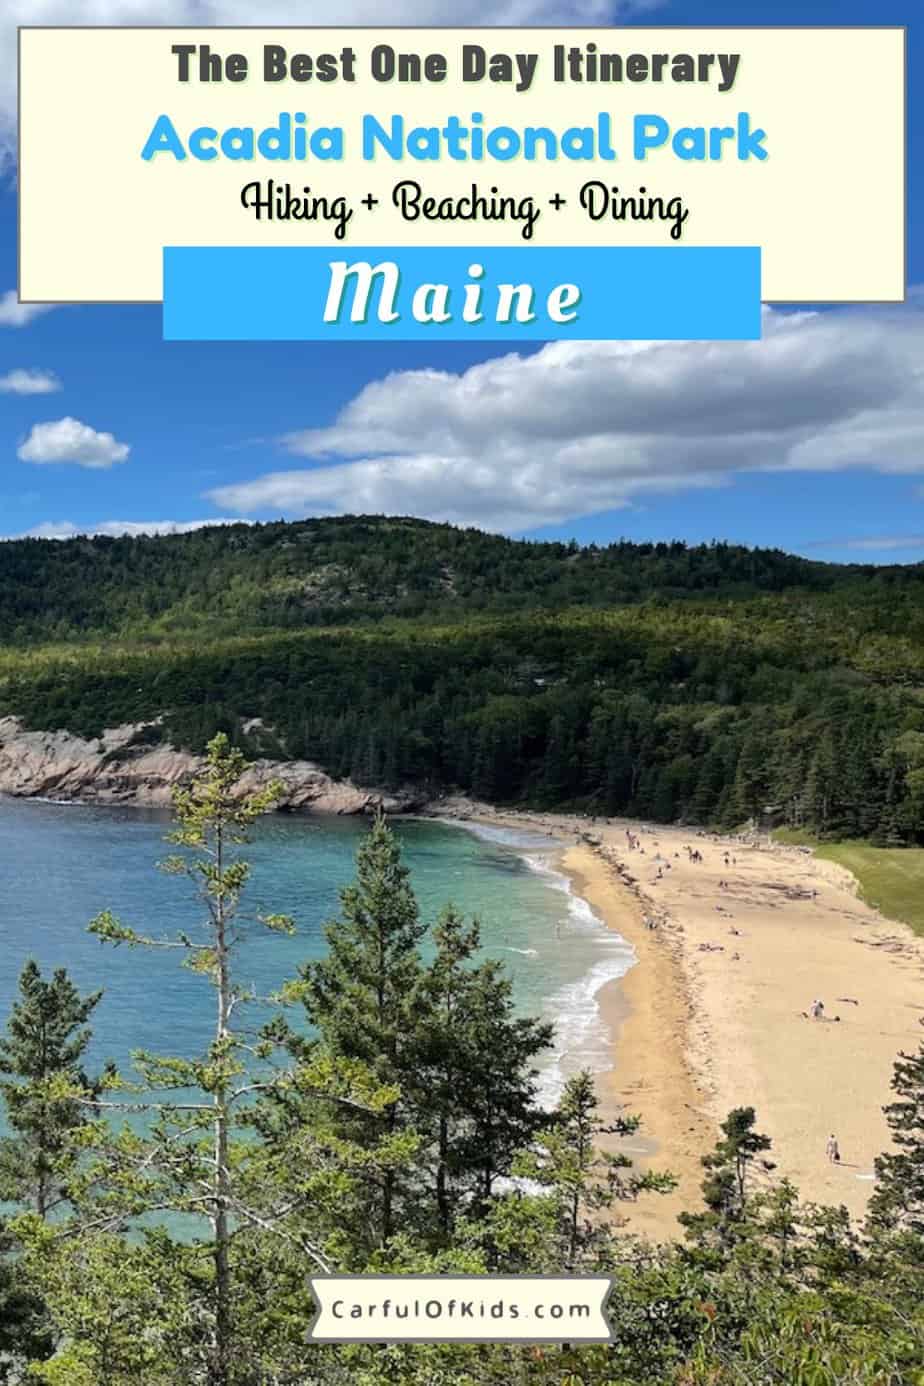 Visit Maine's Acadia National Park in One Day. See the highlights and use the free shuttle. Visit the beach, the pond and a lot more. Add Acadia National Park in Maine to your East Coast Road Trip. Got all the details to explore the oldest national park east of the Mississippi River. Find hiking, beaches and where to eat and more in this free planning guide to Acadia National Park. What to do in one day at Acadia National Park | Where to eat near Acadia National Park #Maine #NationalParks 